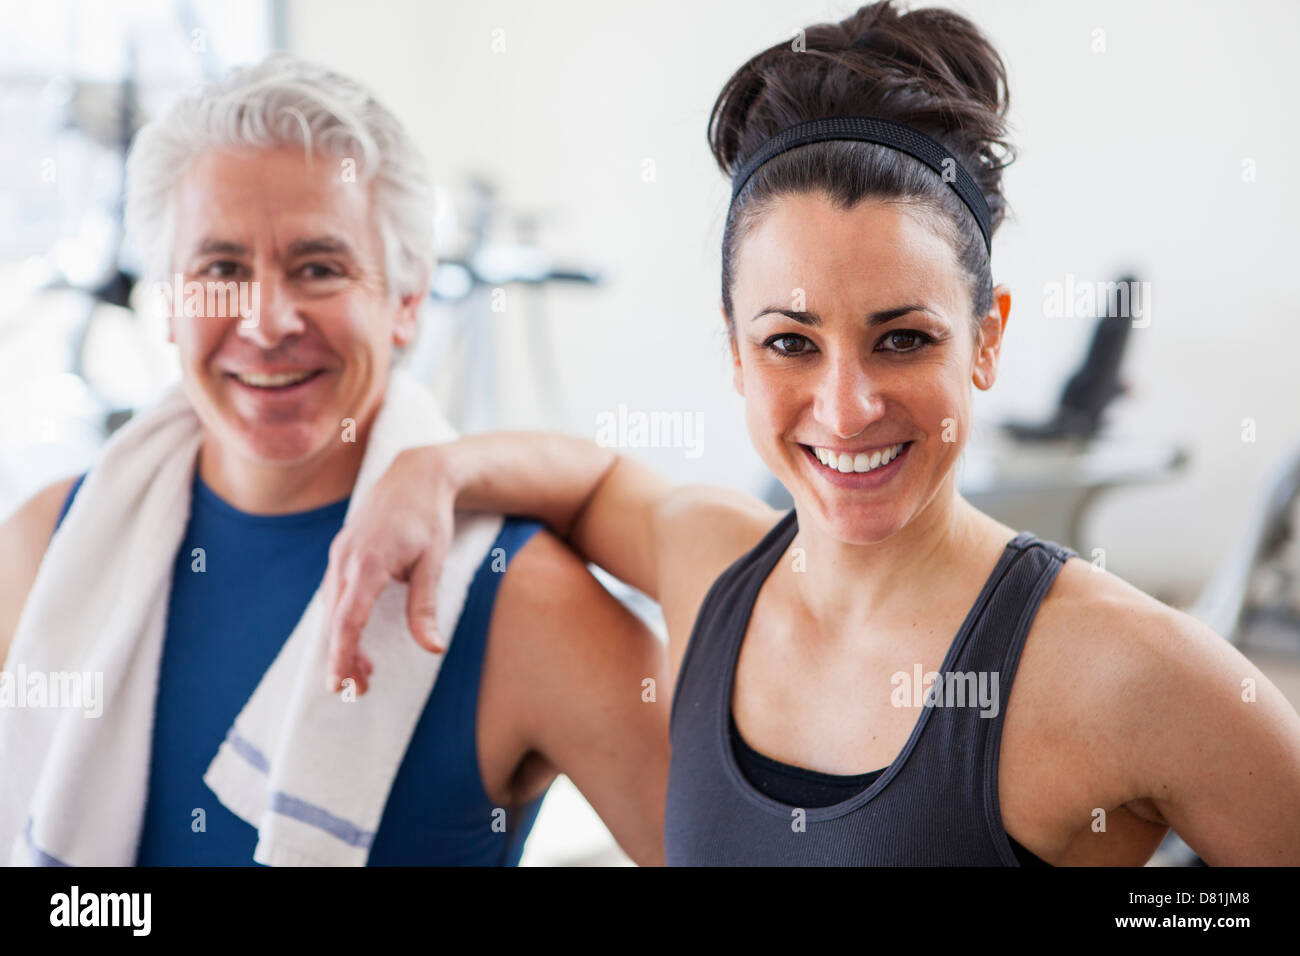 Amis Hispanic woman smiling in gym Banque D'Images